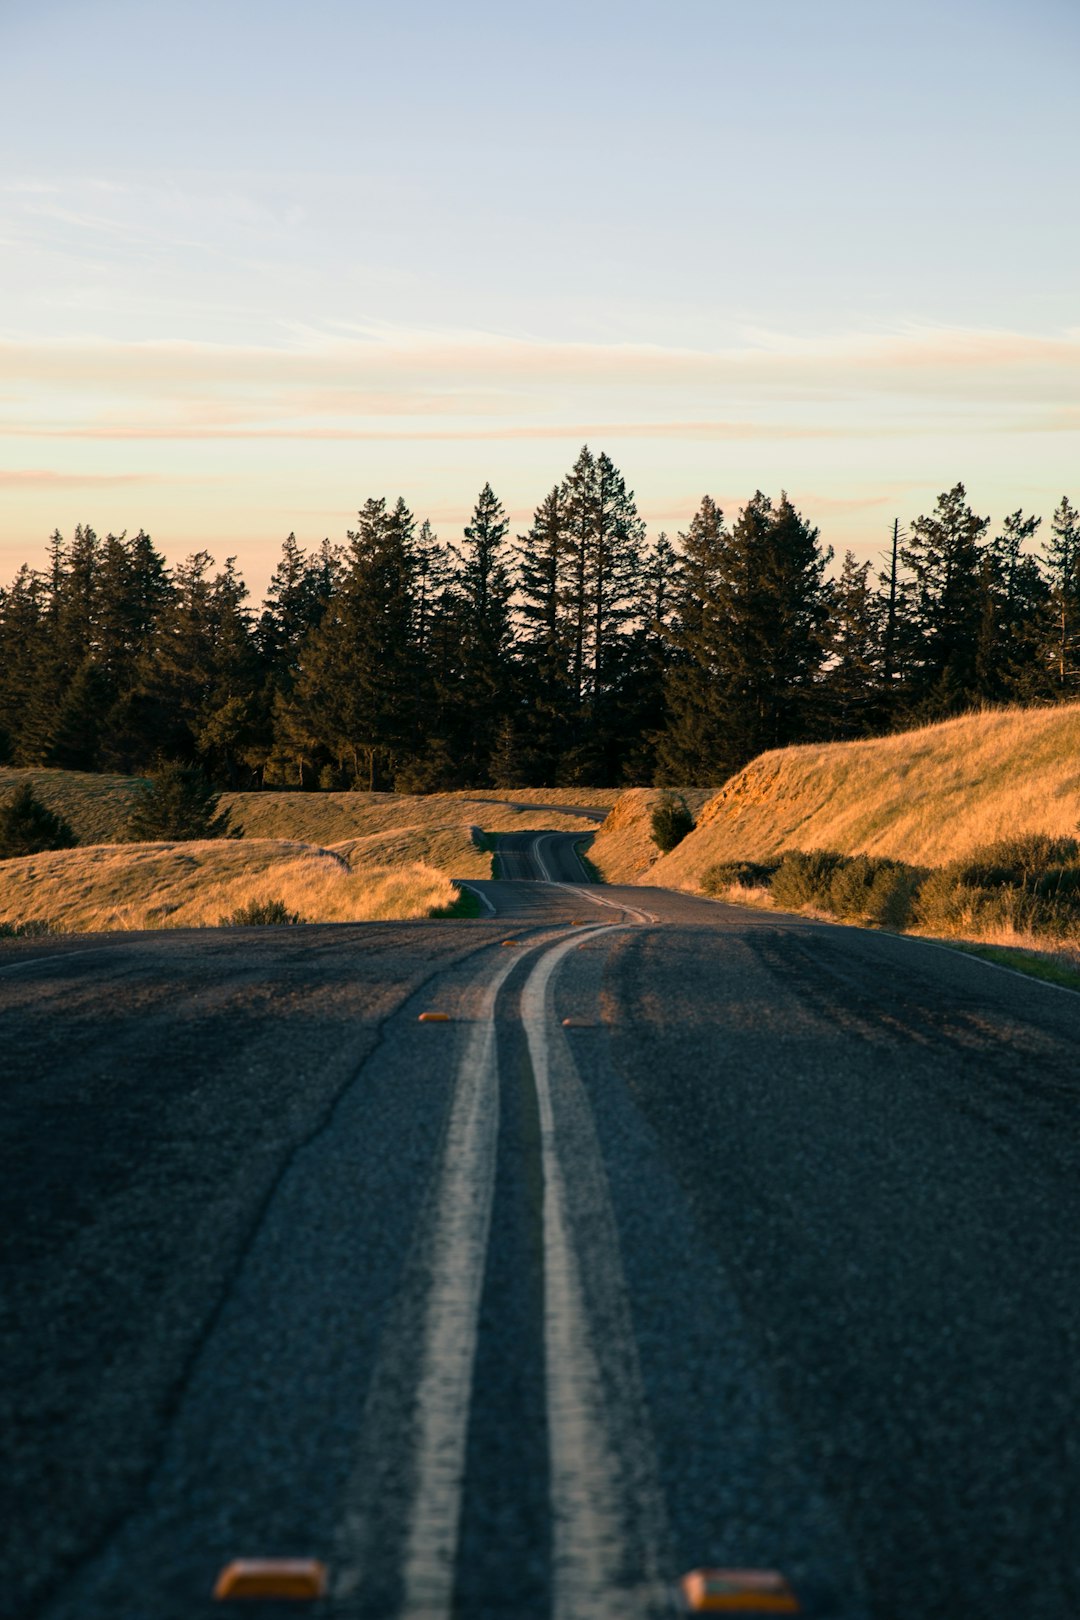 travelers stories about Road trip in Mount Tamalpais, United States